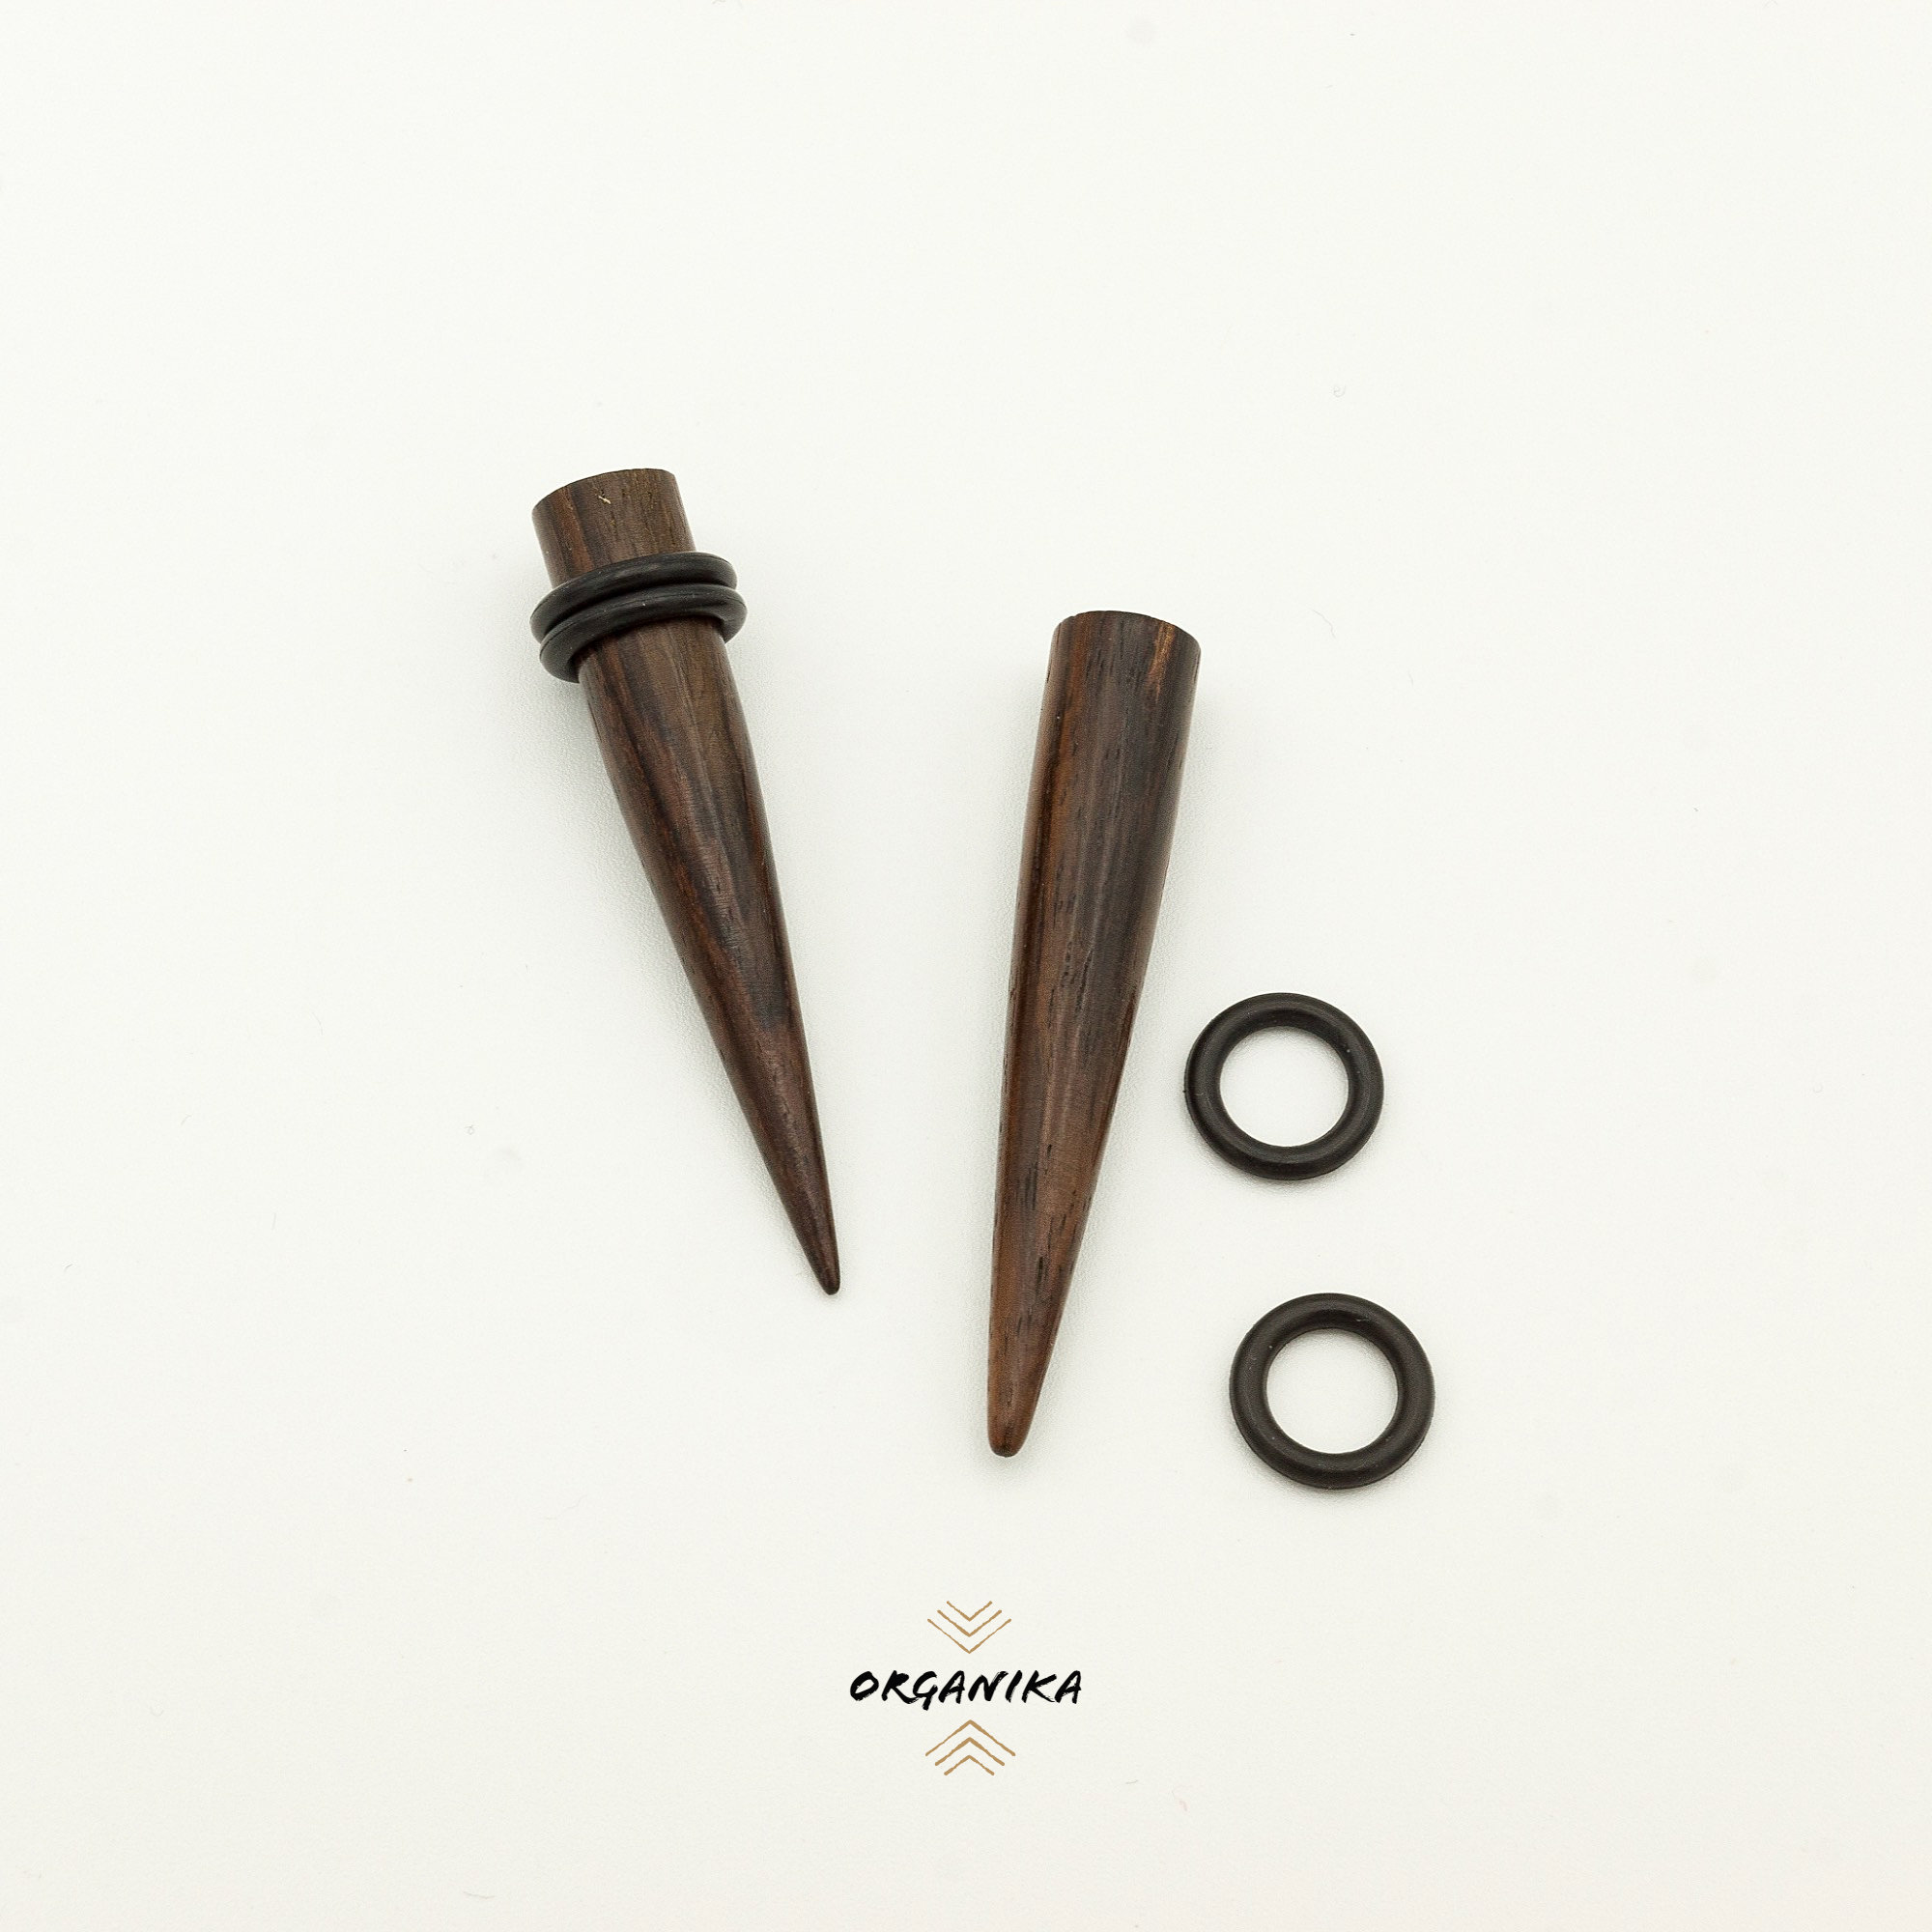 25mm Wood Keychain Blanks Ebony Brown, Cherry, Natural Options